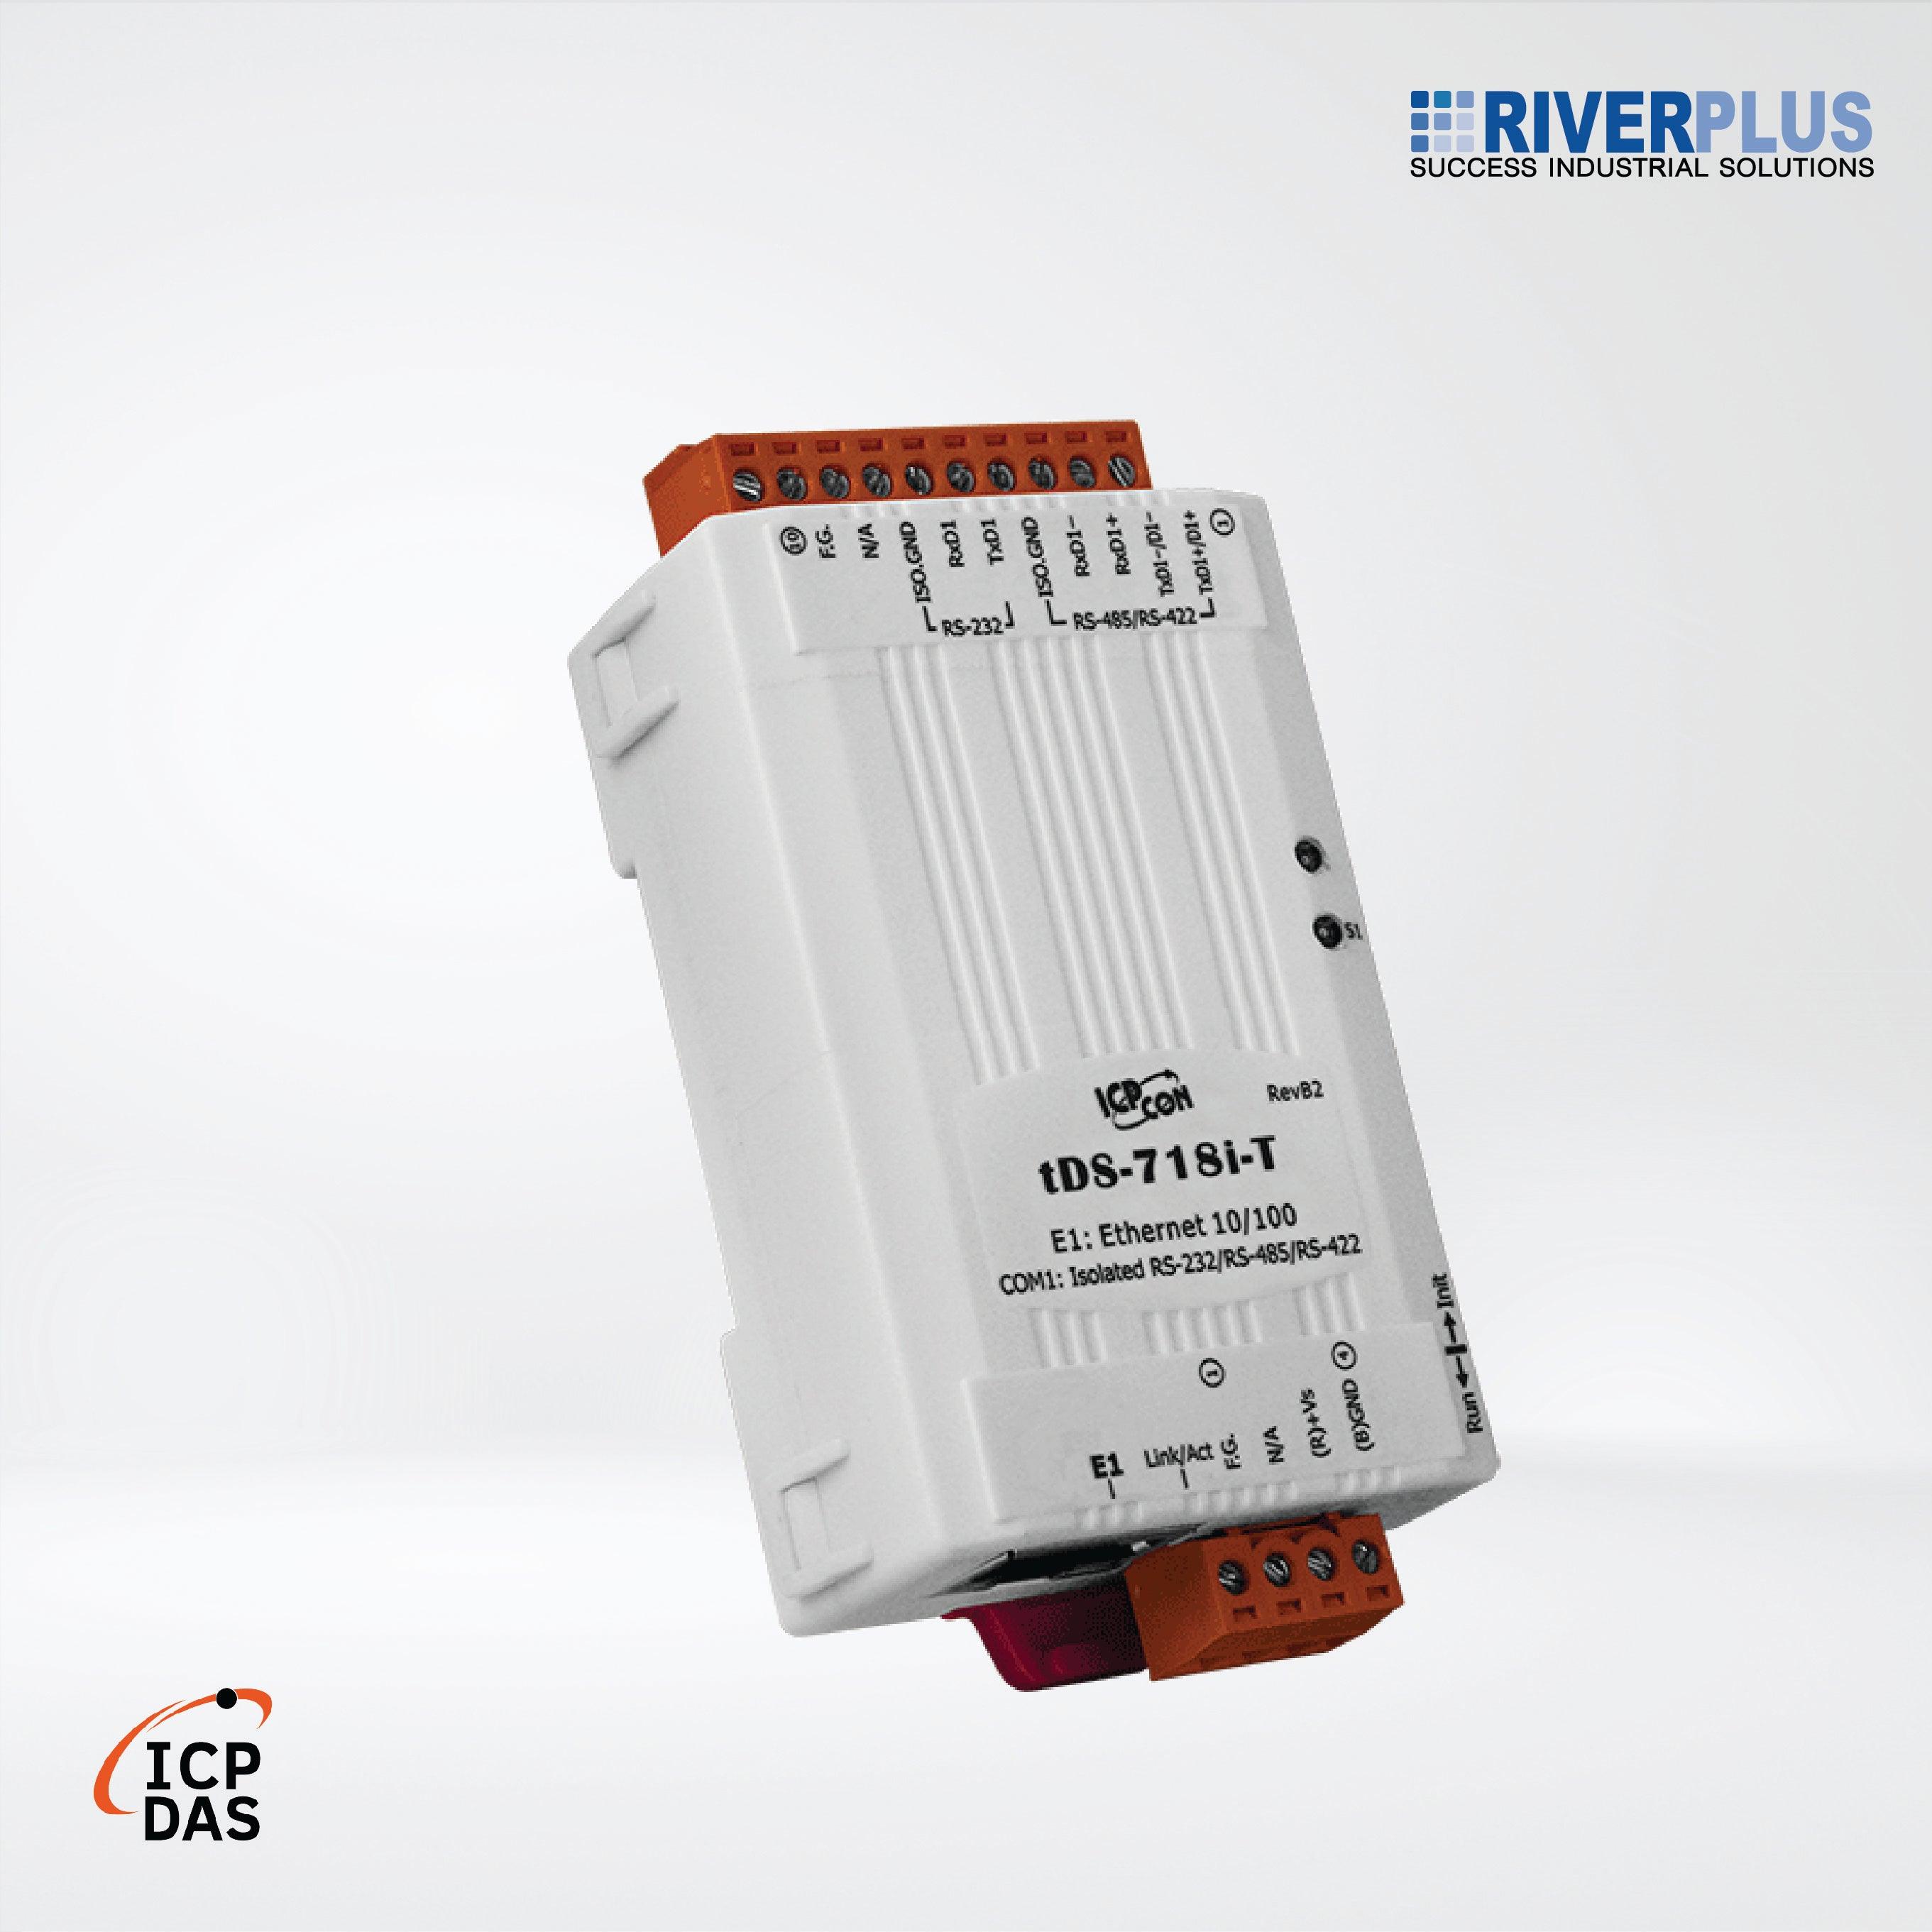 tDS-718i-T CR Tiny (1x Isolated RS-232/422/485) Serial-to-Ethernet Device Server (Terminal Block Power Input) - Riverplus